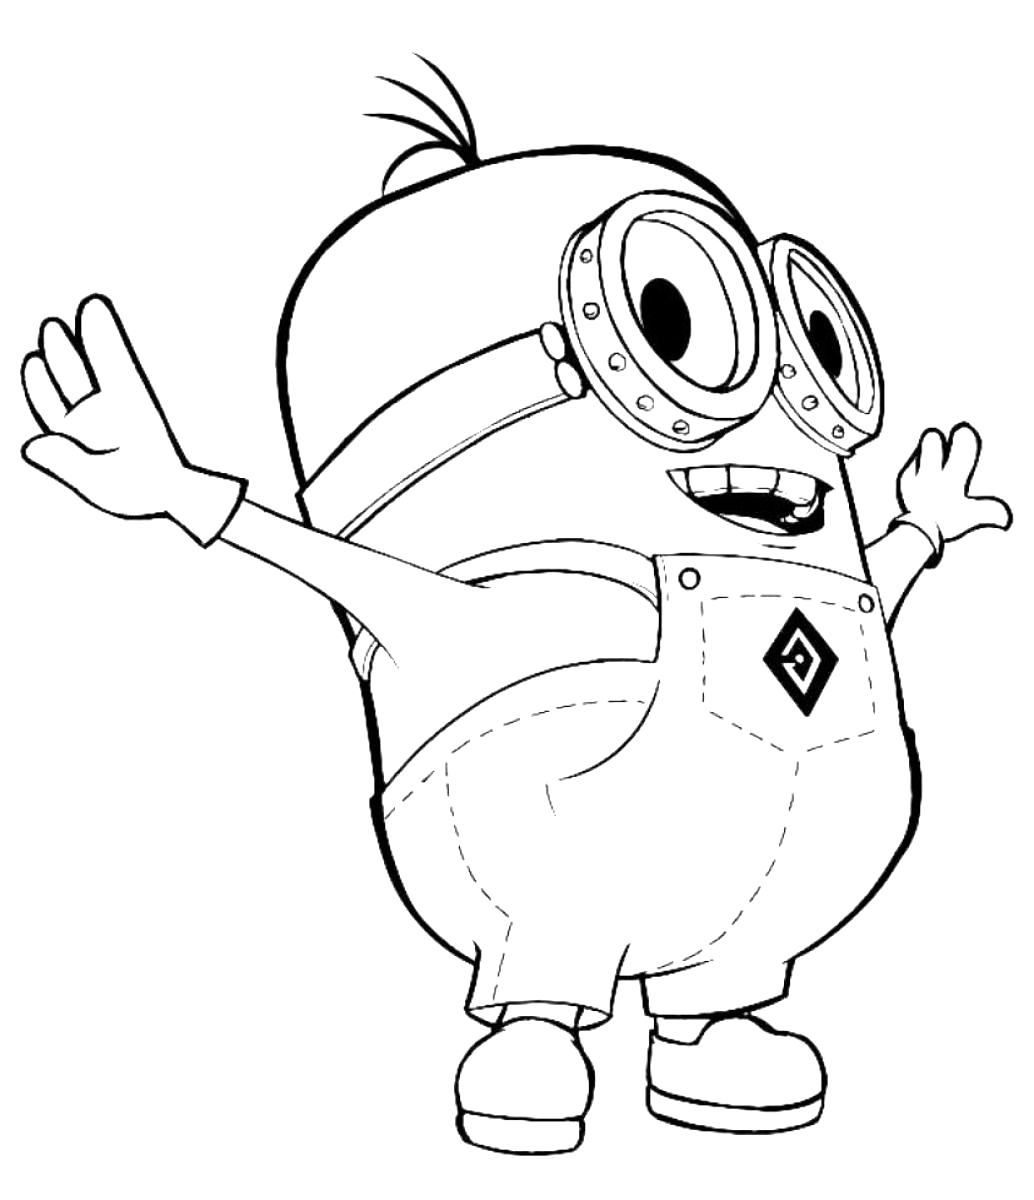 Print and color this drawing of Dave from the movies The Minions